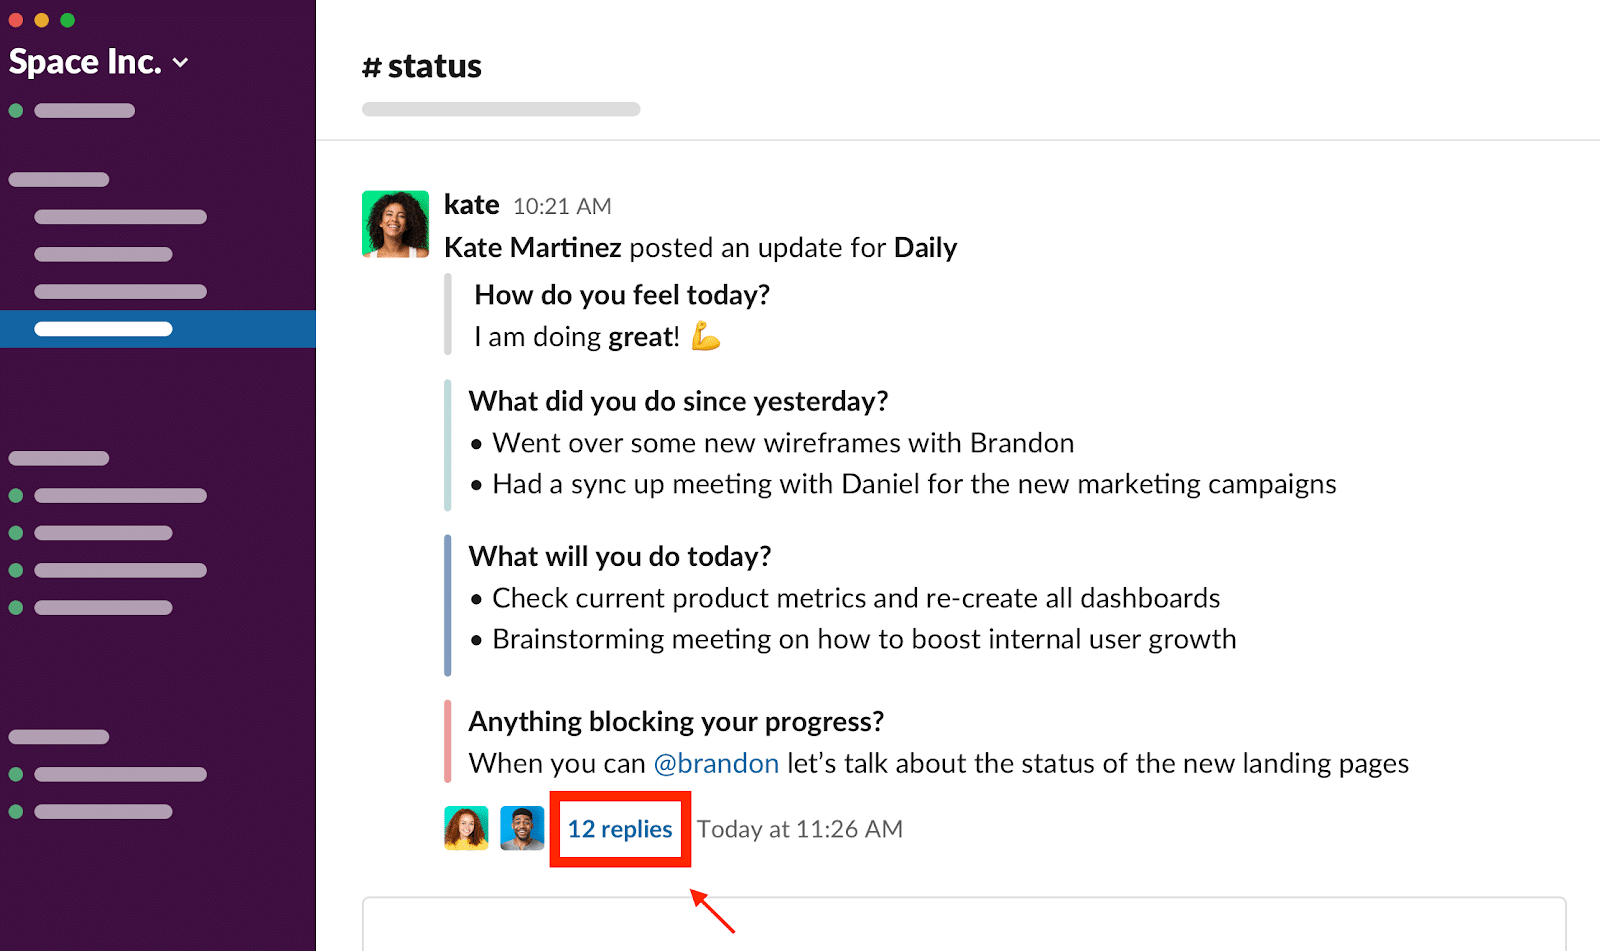 With Geekbot, threaded conversations within Slack are extremely useful.